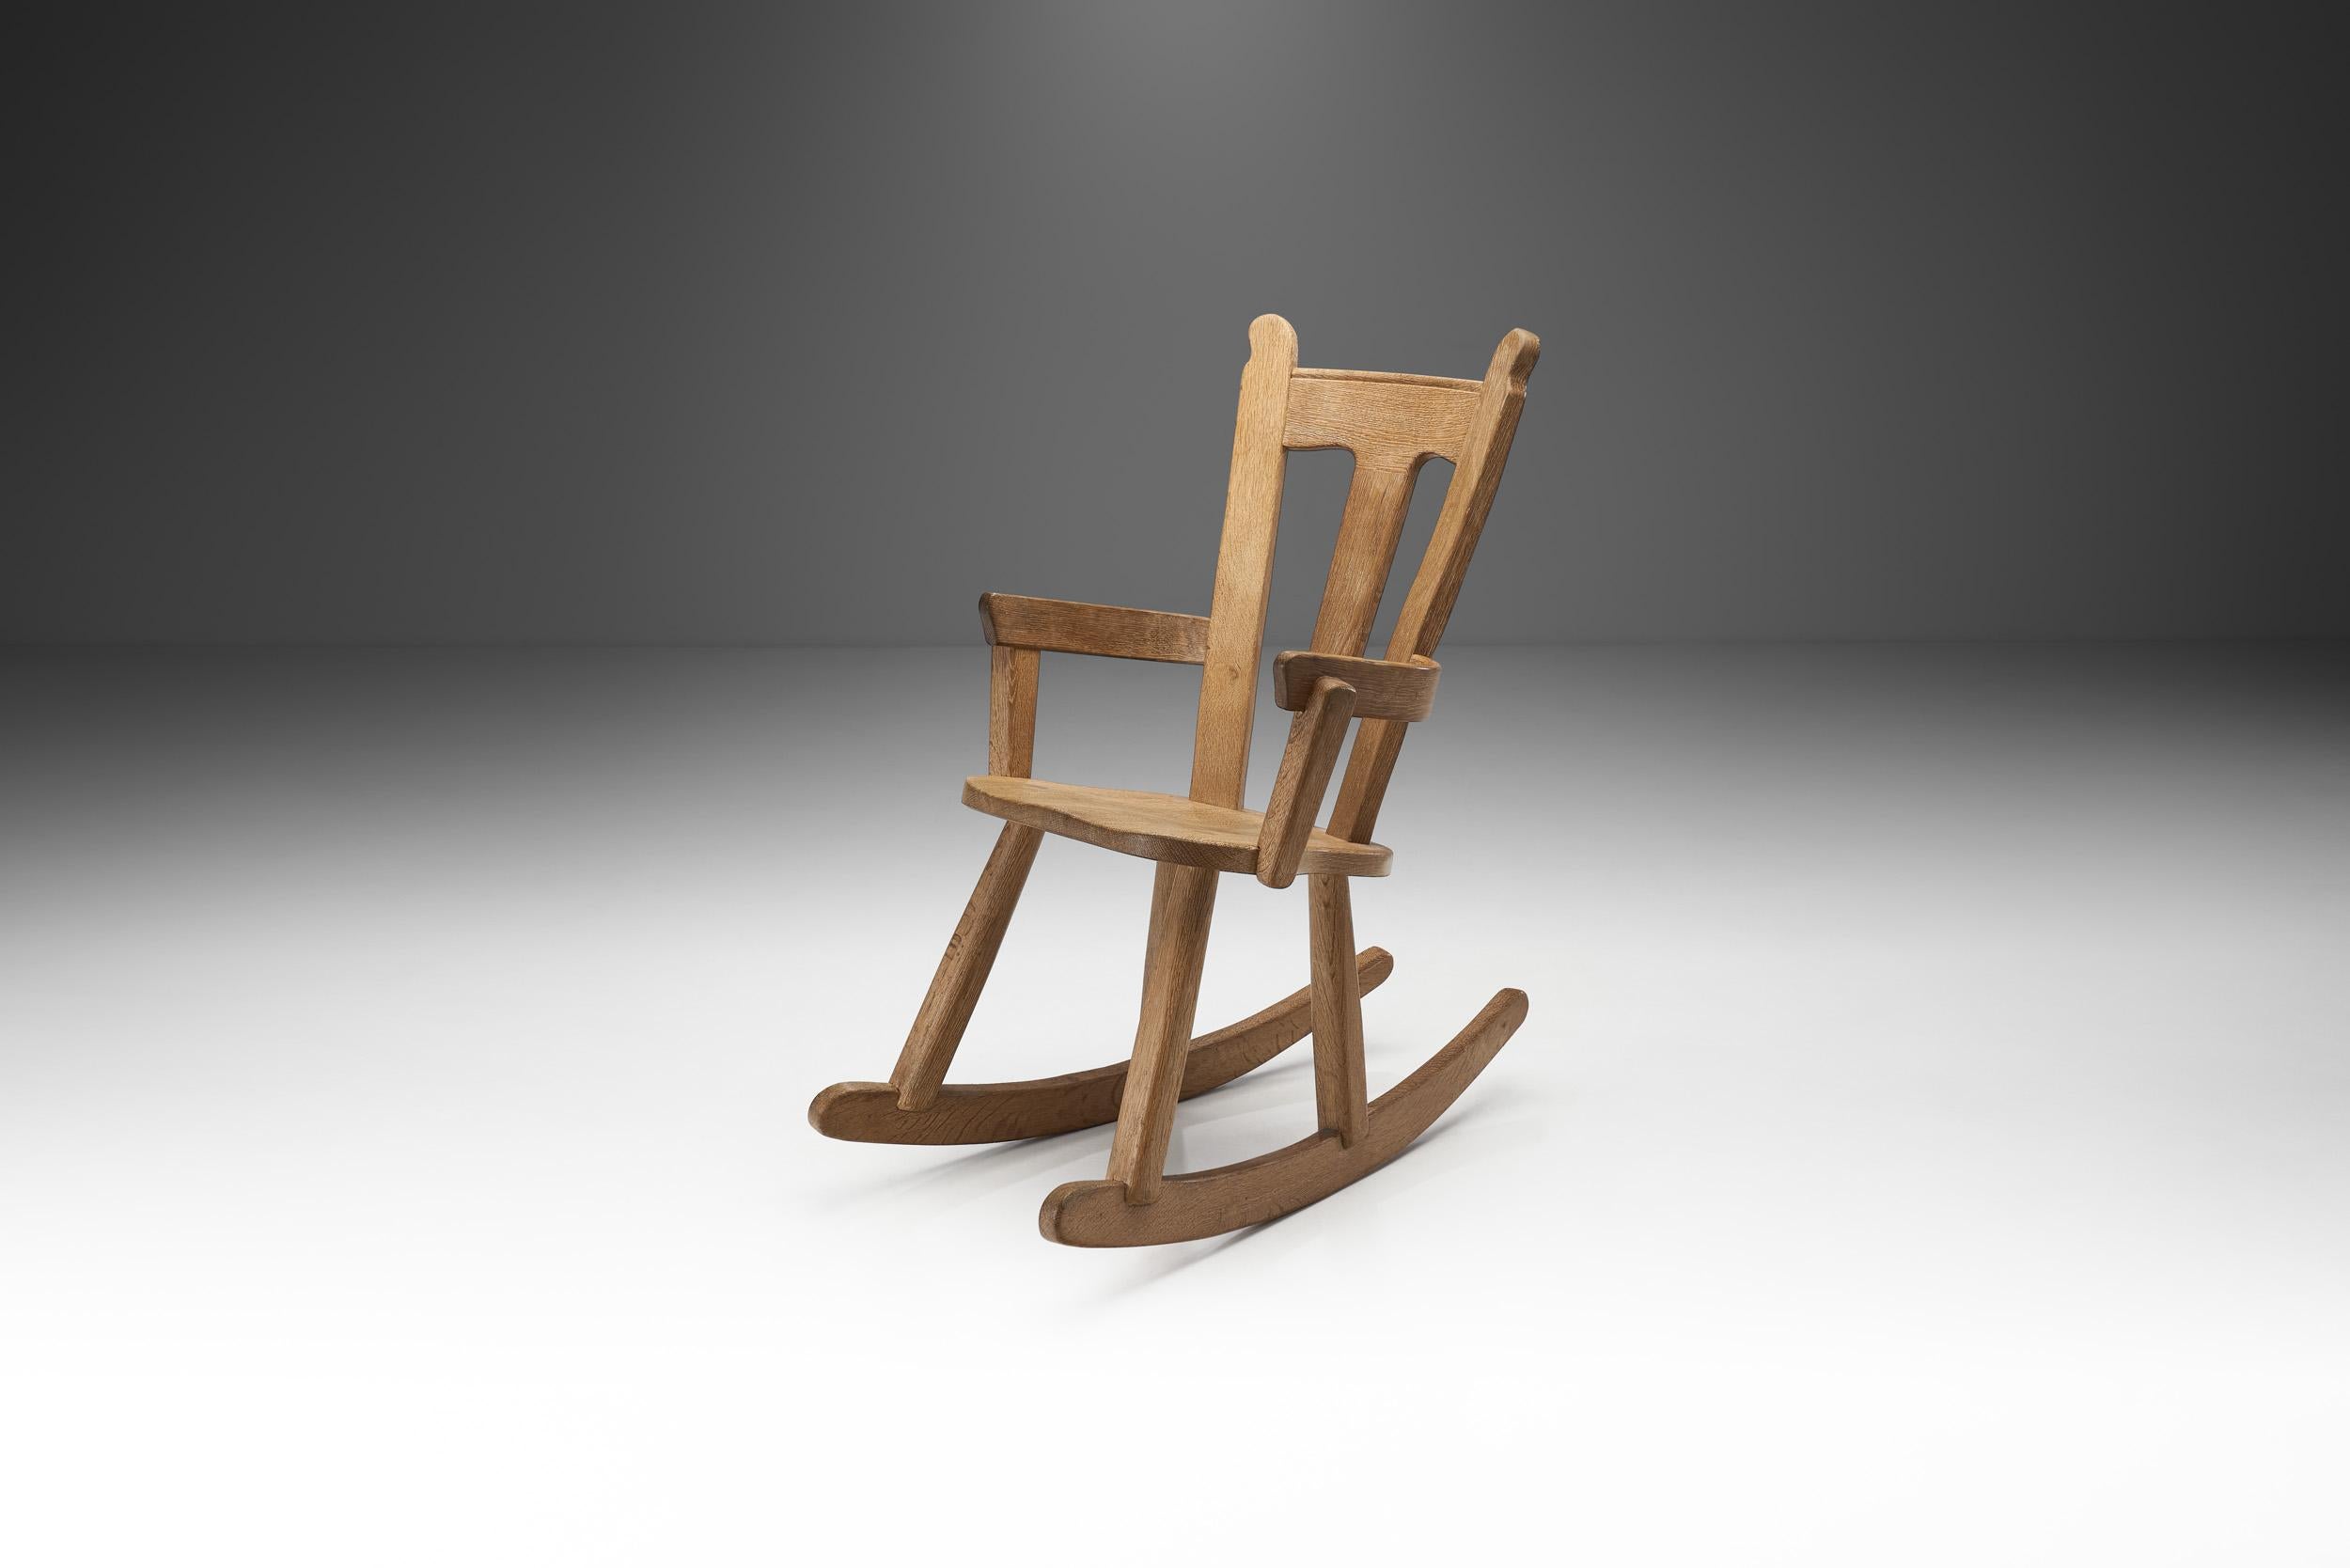 While they play a prominent role in both architecture and pop culture, rocking chairs solidified their place in Scandinavian design history as well. As this model proves, functionality can manifest in many forms, but it is always accompanied by